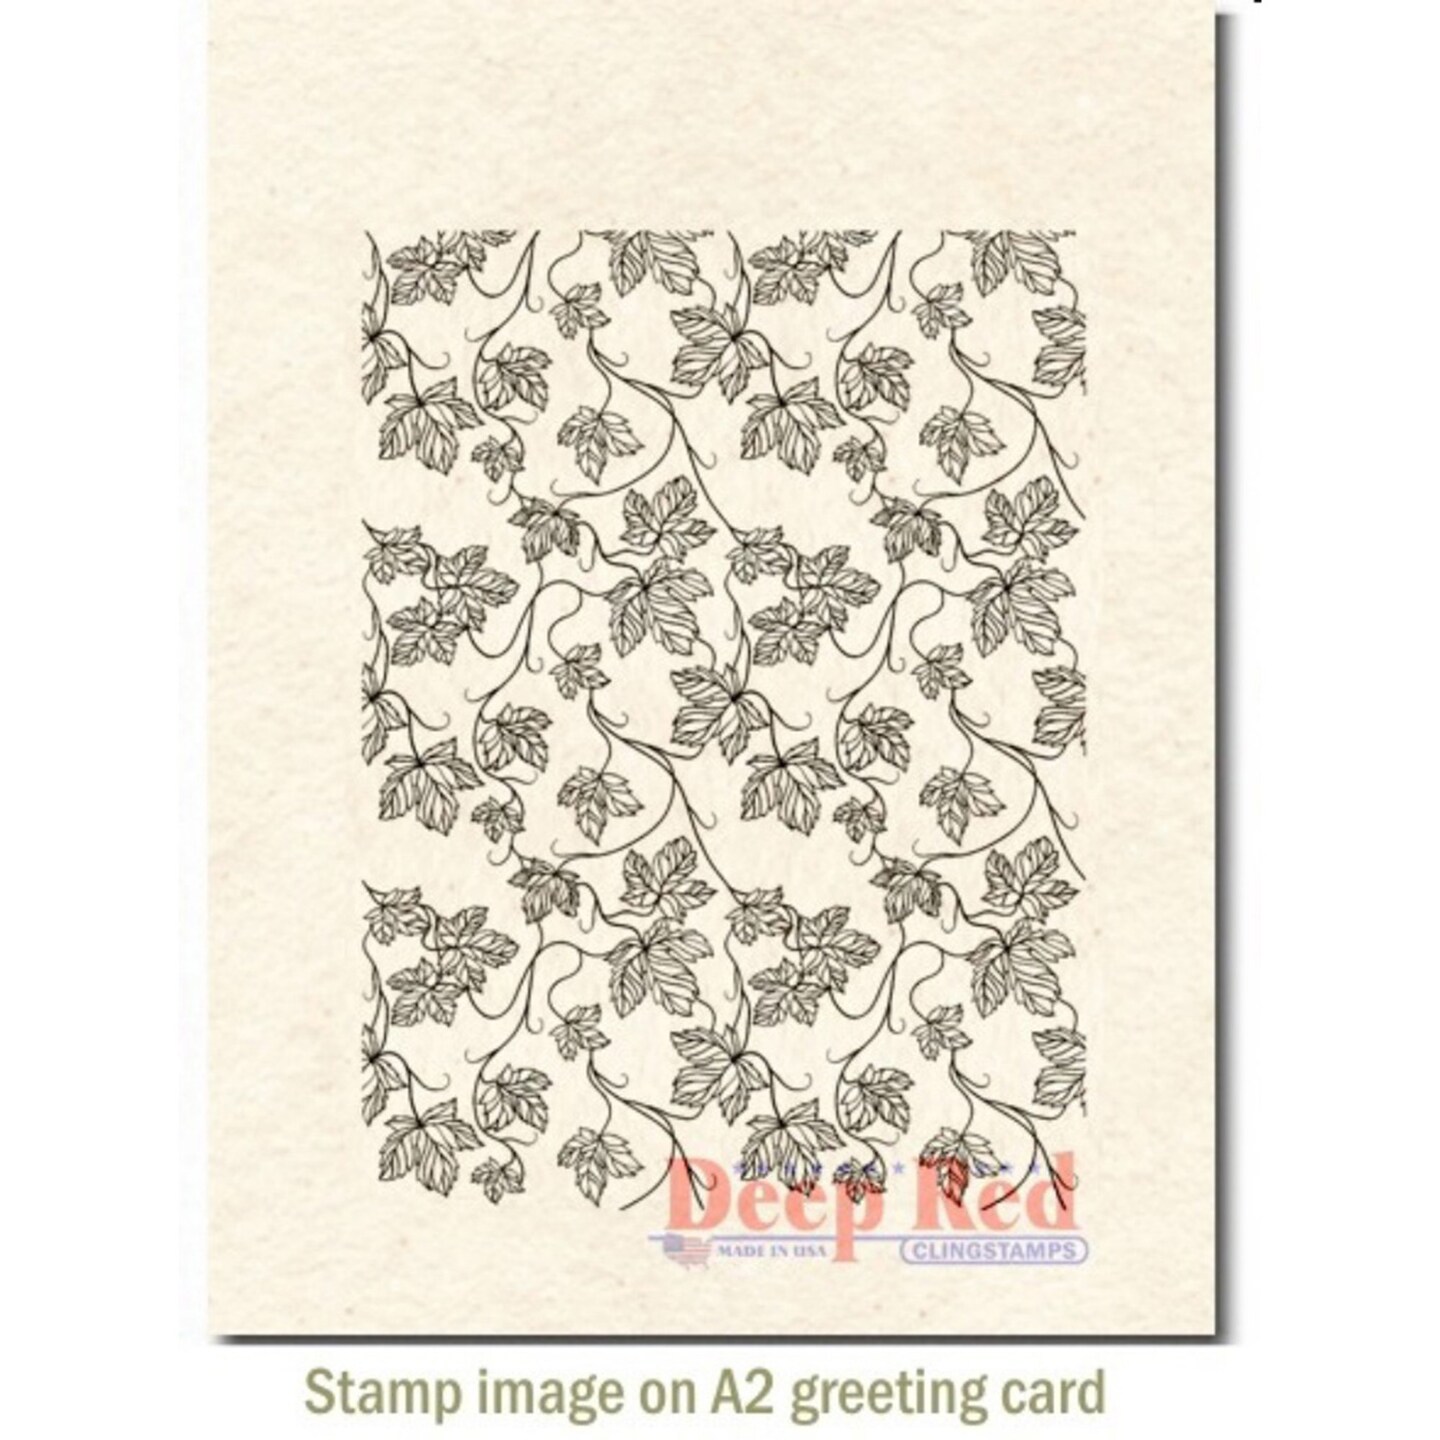 Deep Red Stamps Vines Background Rubber Cling Stamp 3 x 4 inches